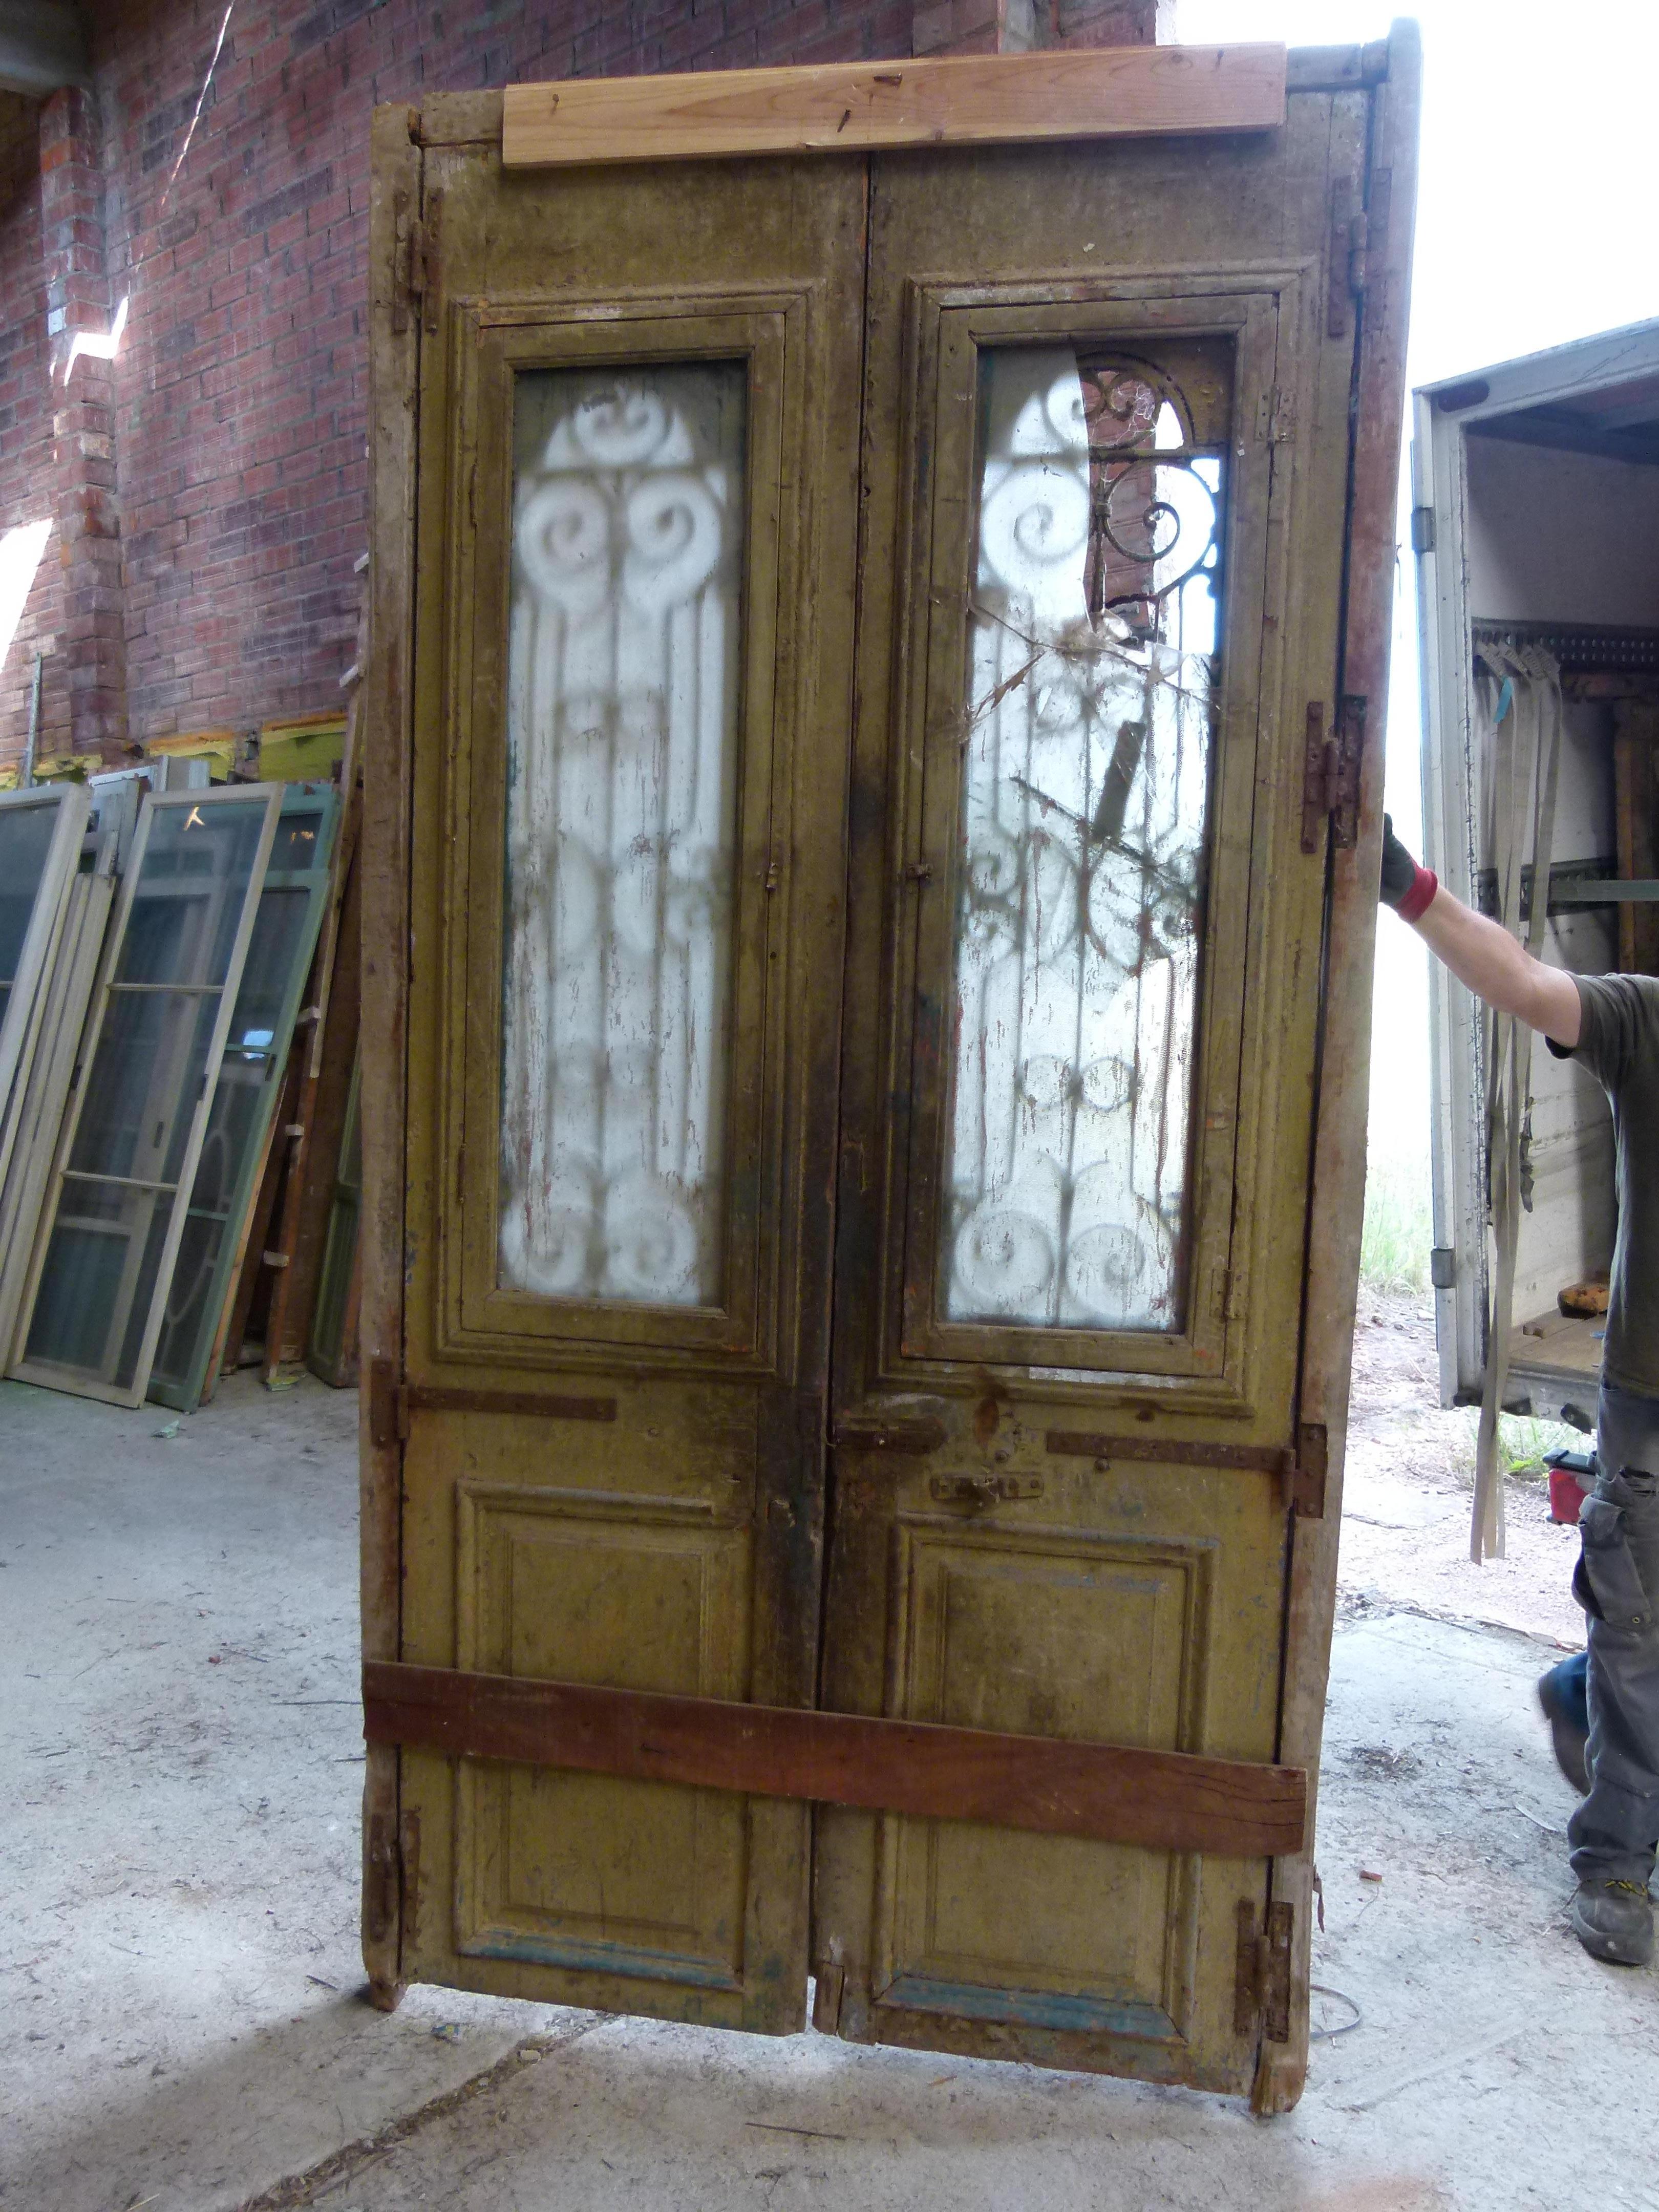 19th century wooden double front door with patina in Art Nouveau style.
Carved wood and cast iron typical from this period.
The original patina of the door and its style will give the charm that your building or house needs.